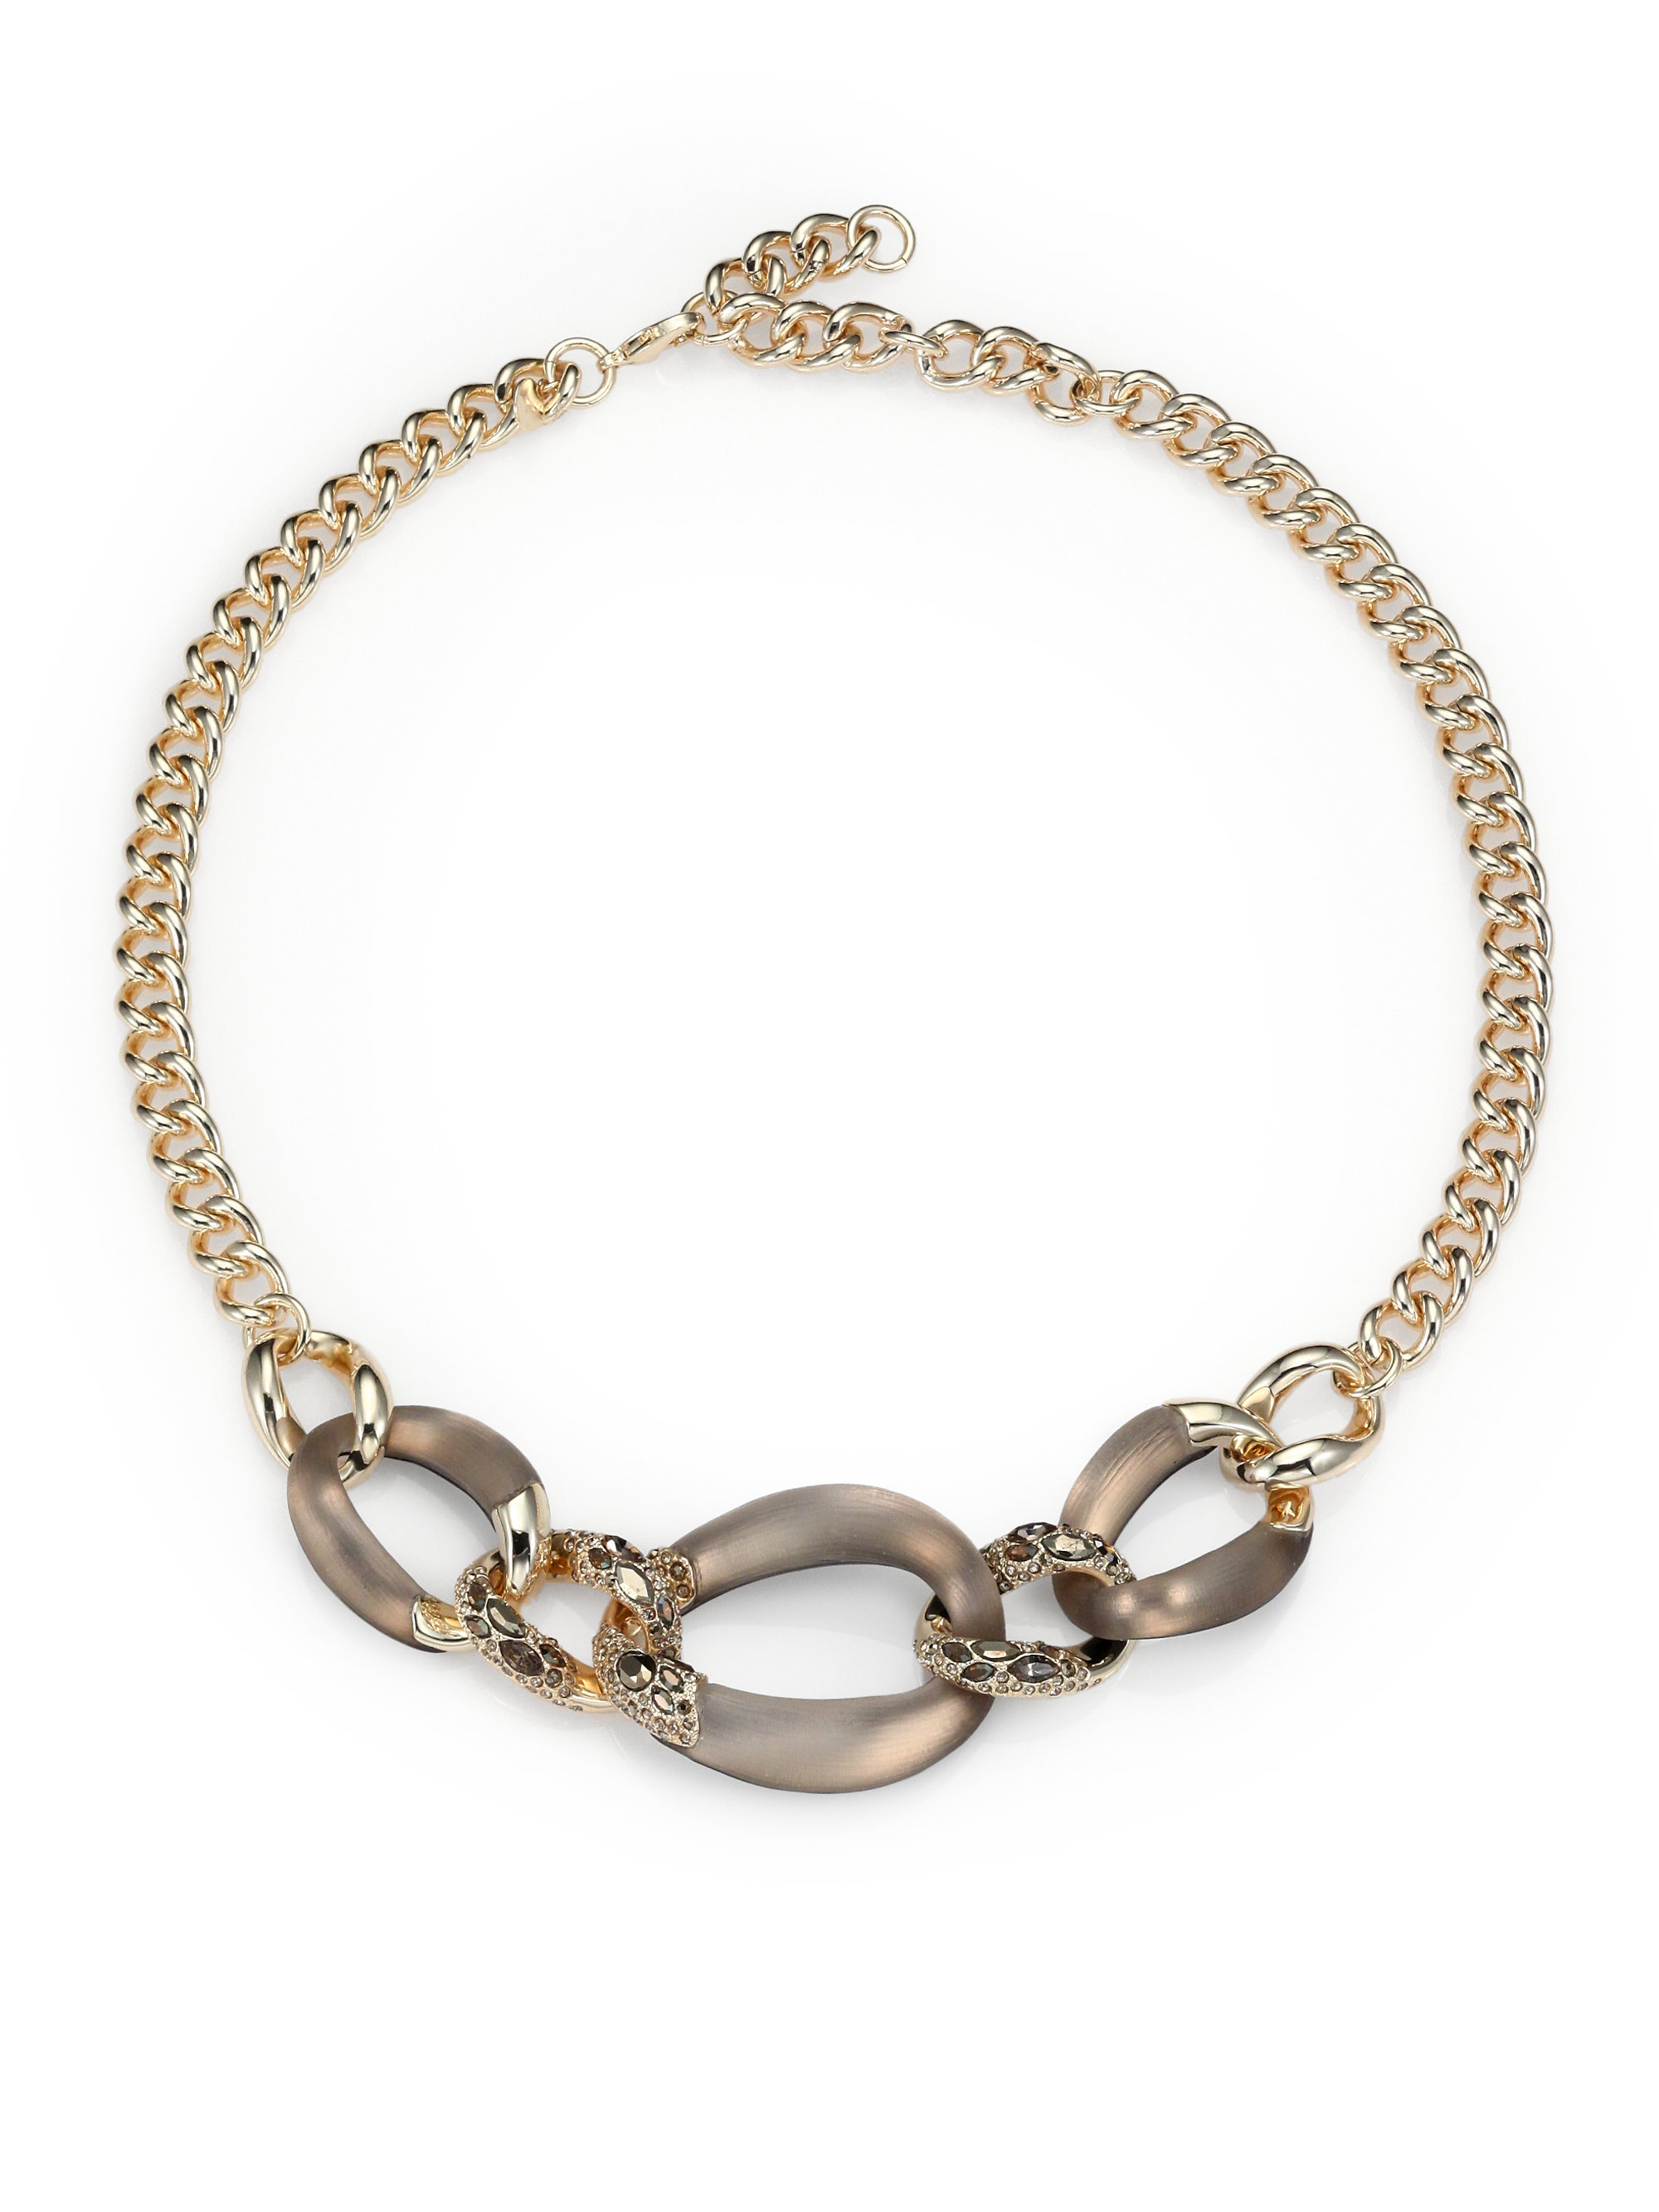 Alexis Bittar Lucite Crystal Chain Link Necklace in Gold (GREY) | Lyst